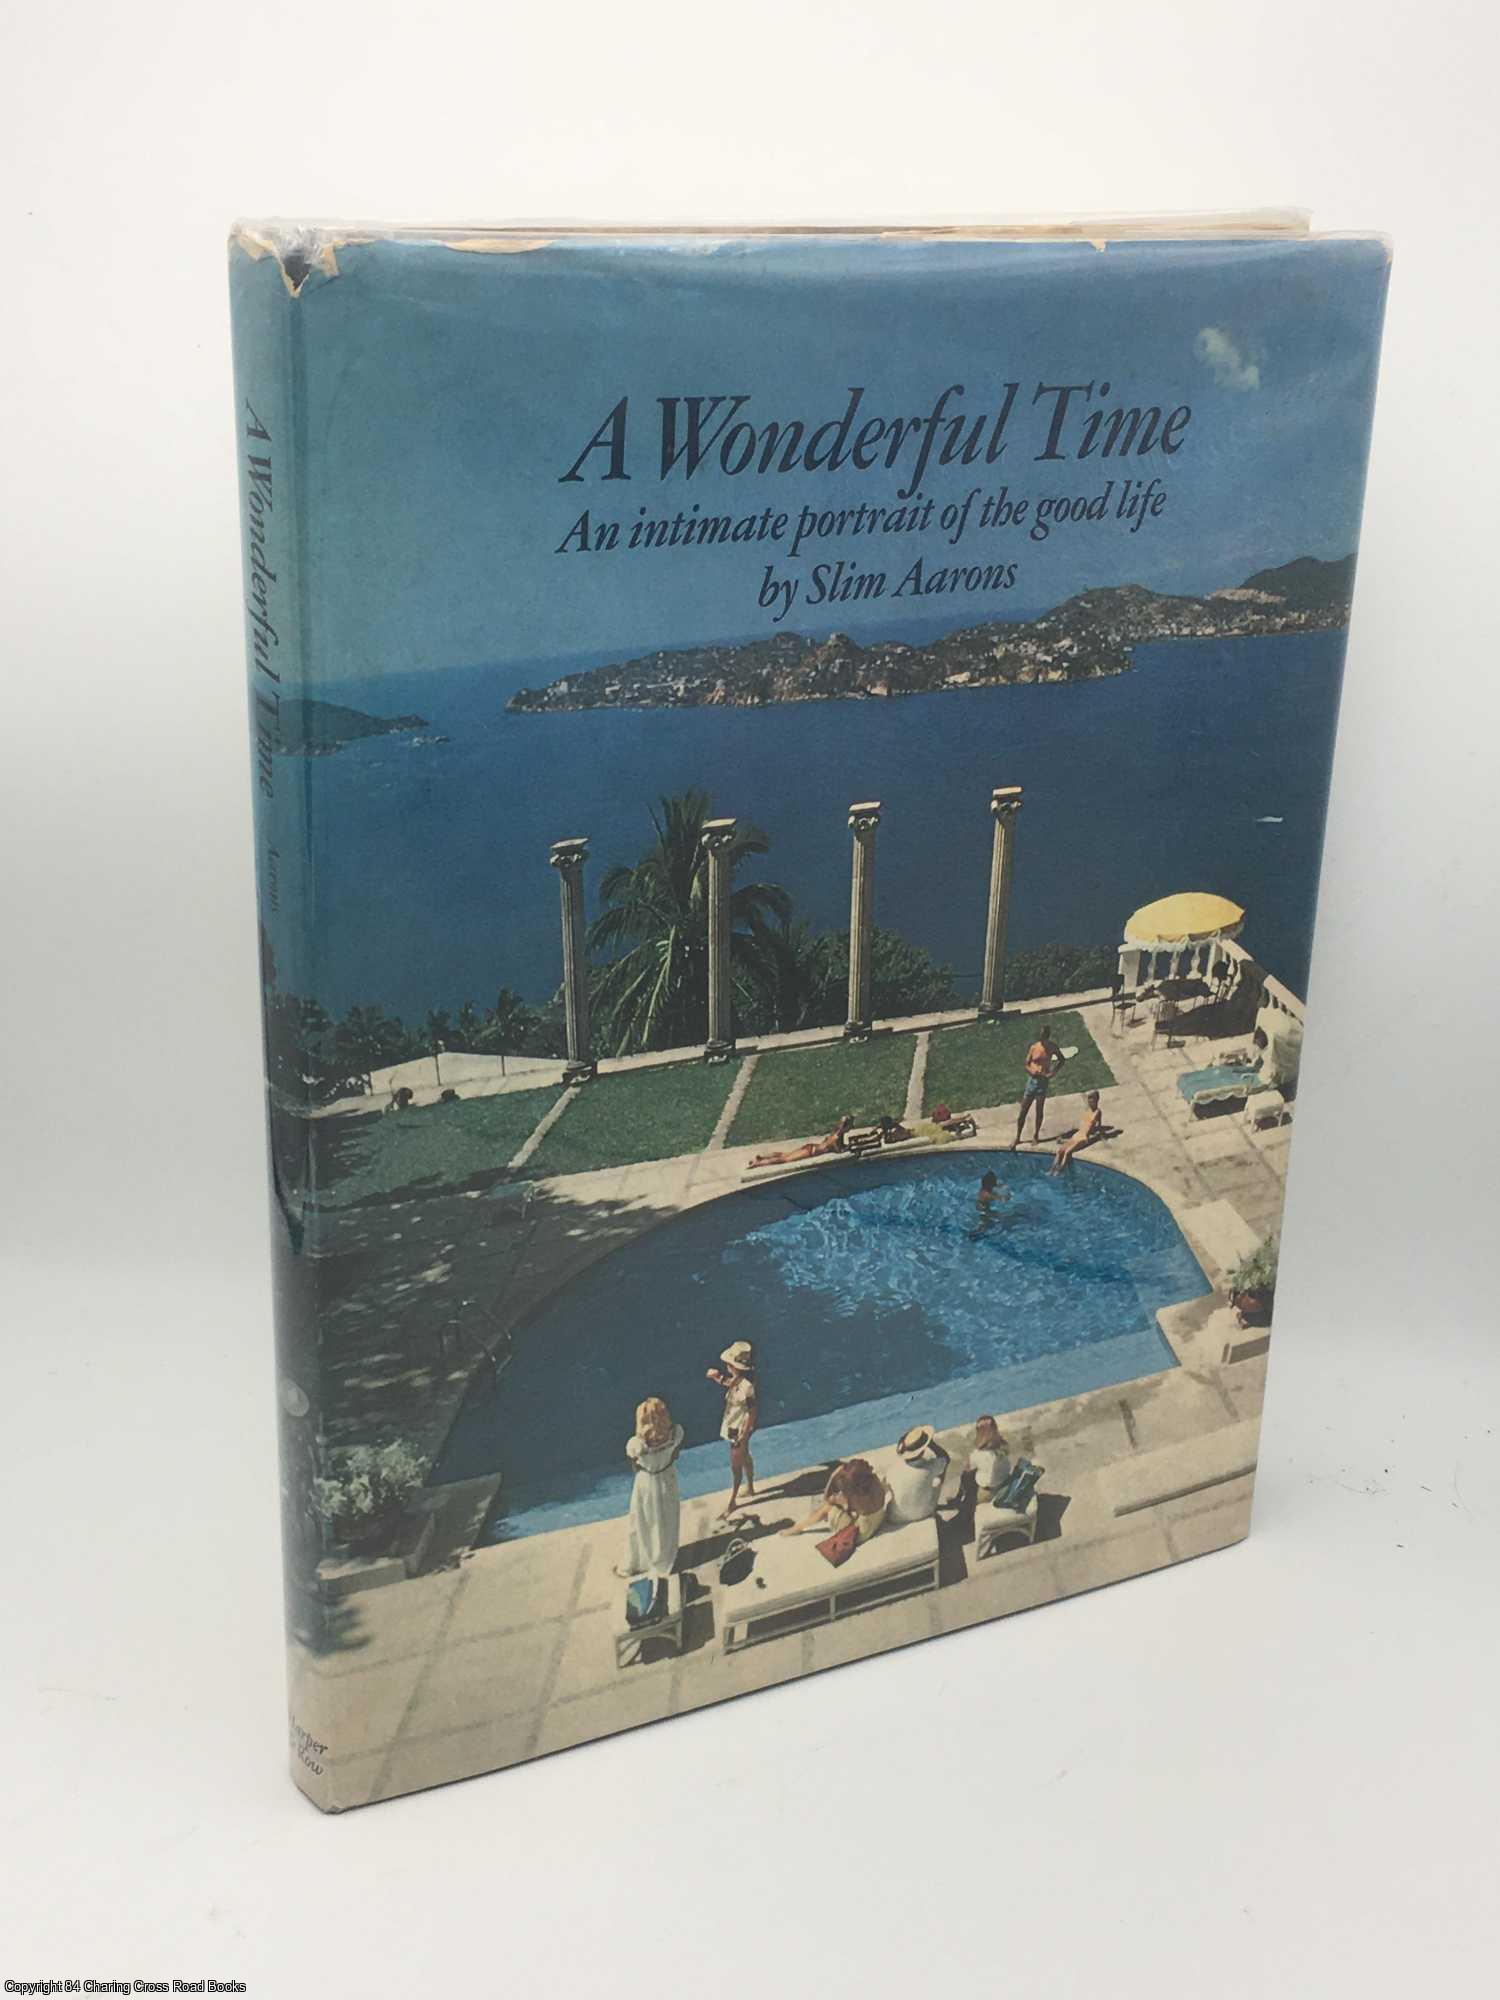 Aarons, Slim - A Wonderful Time: An Intimate Portrait of the Good Life